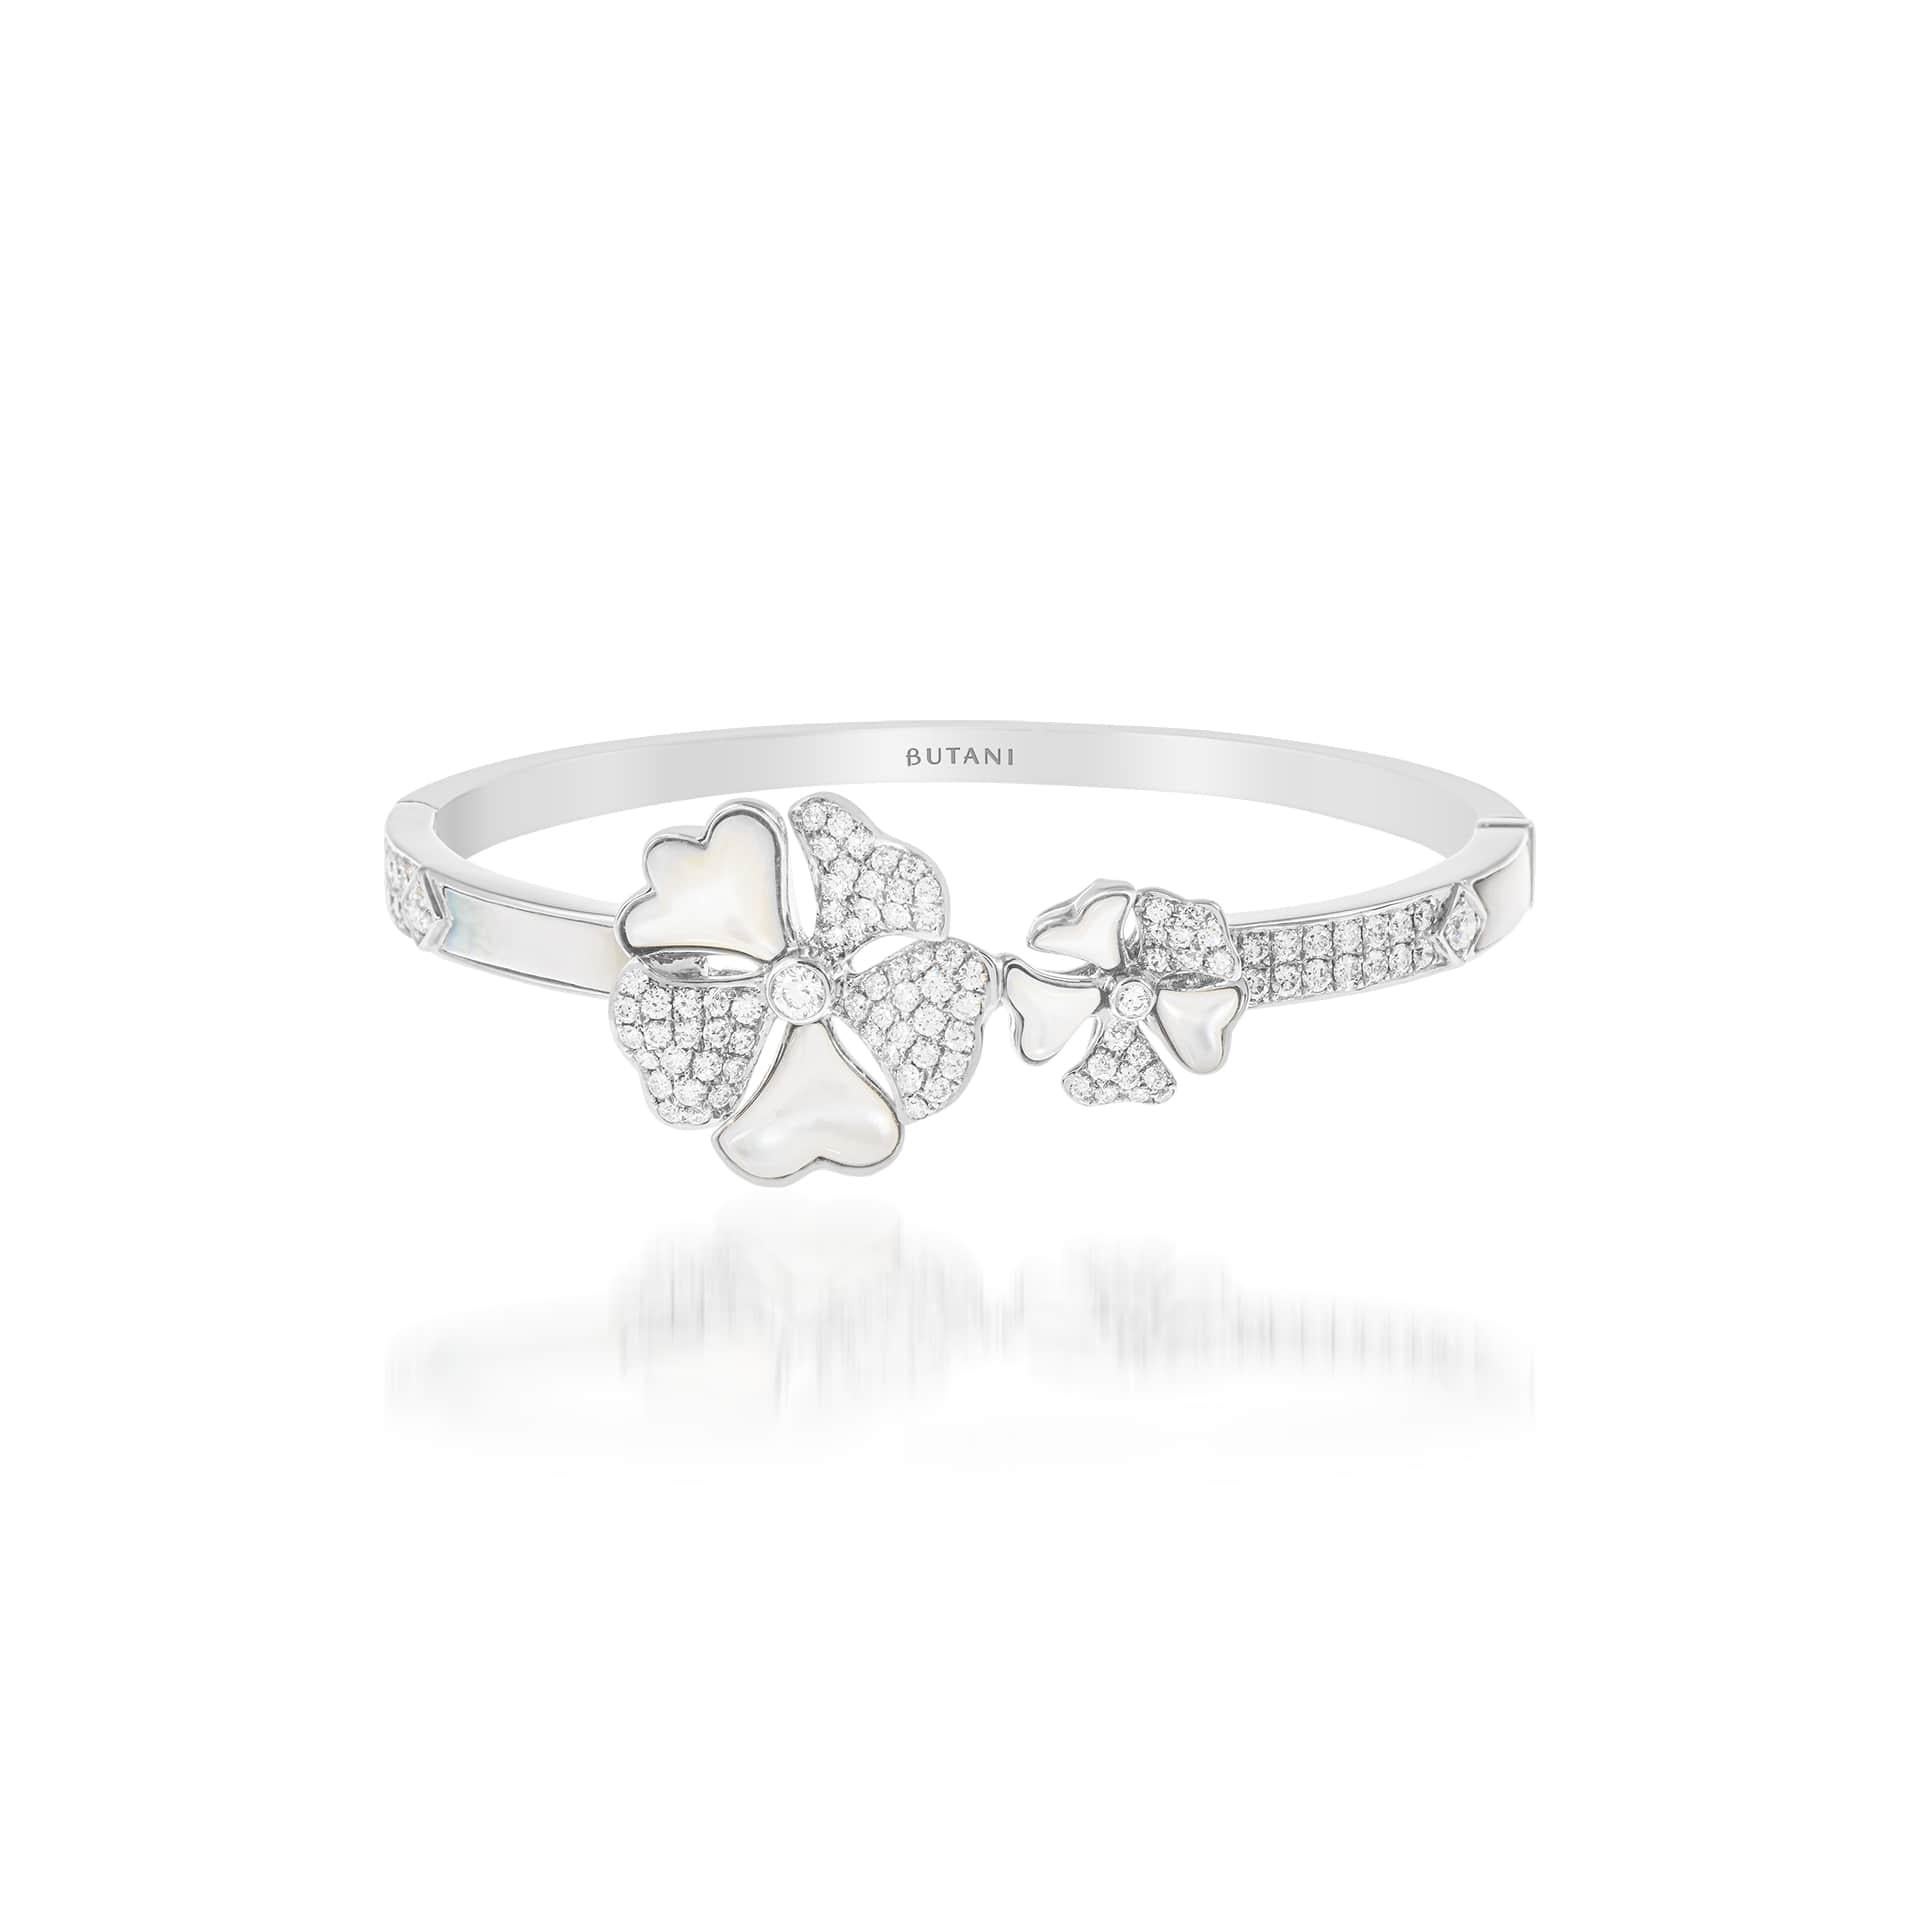 Bloom Diamond and Mother-of-Pearl Duo Flower Bangle in 18K White Gold

Inspired by the exquisite petals of the alpine cinquefoil flower, the Bloom collection combines the richness of diamonds and precious metals with the light versatility of this